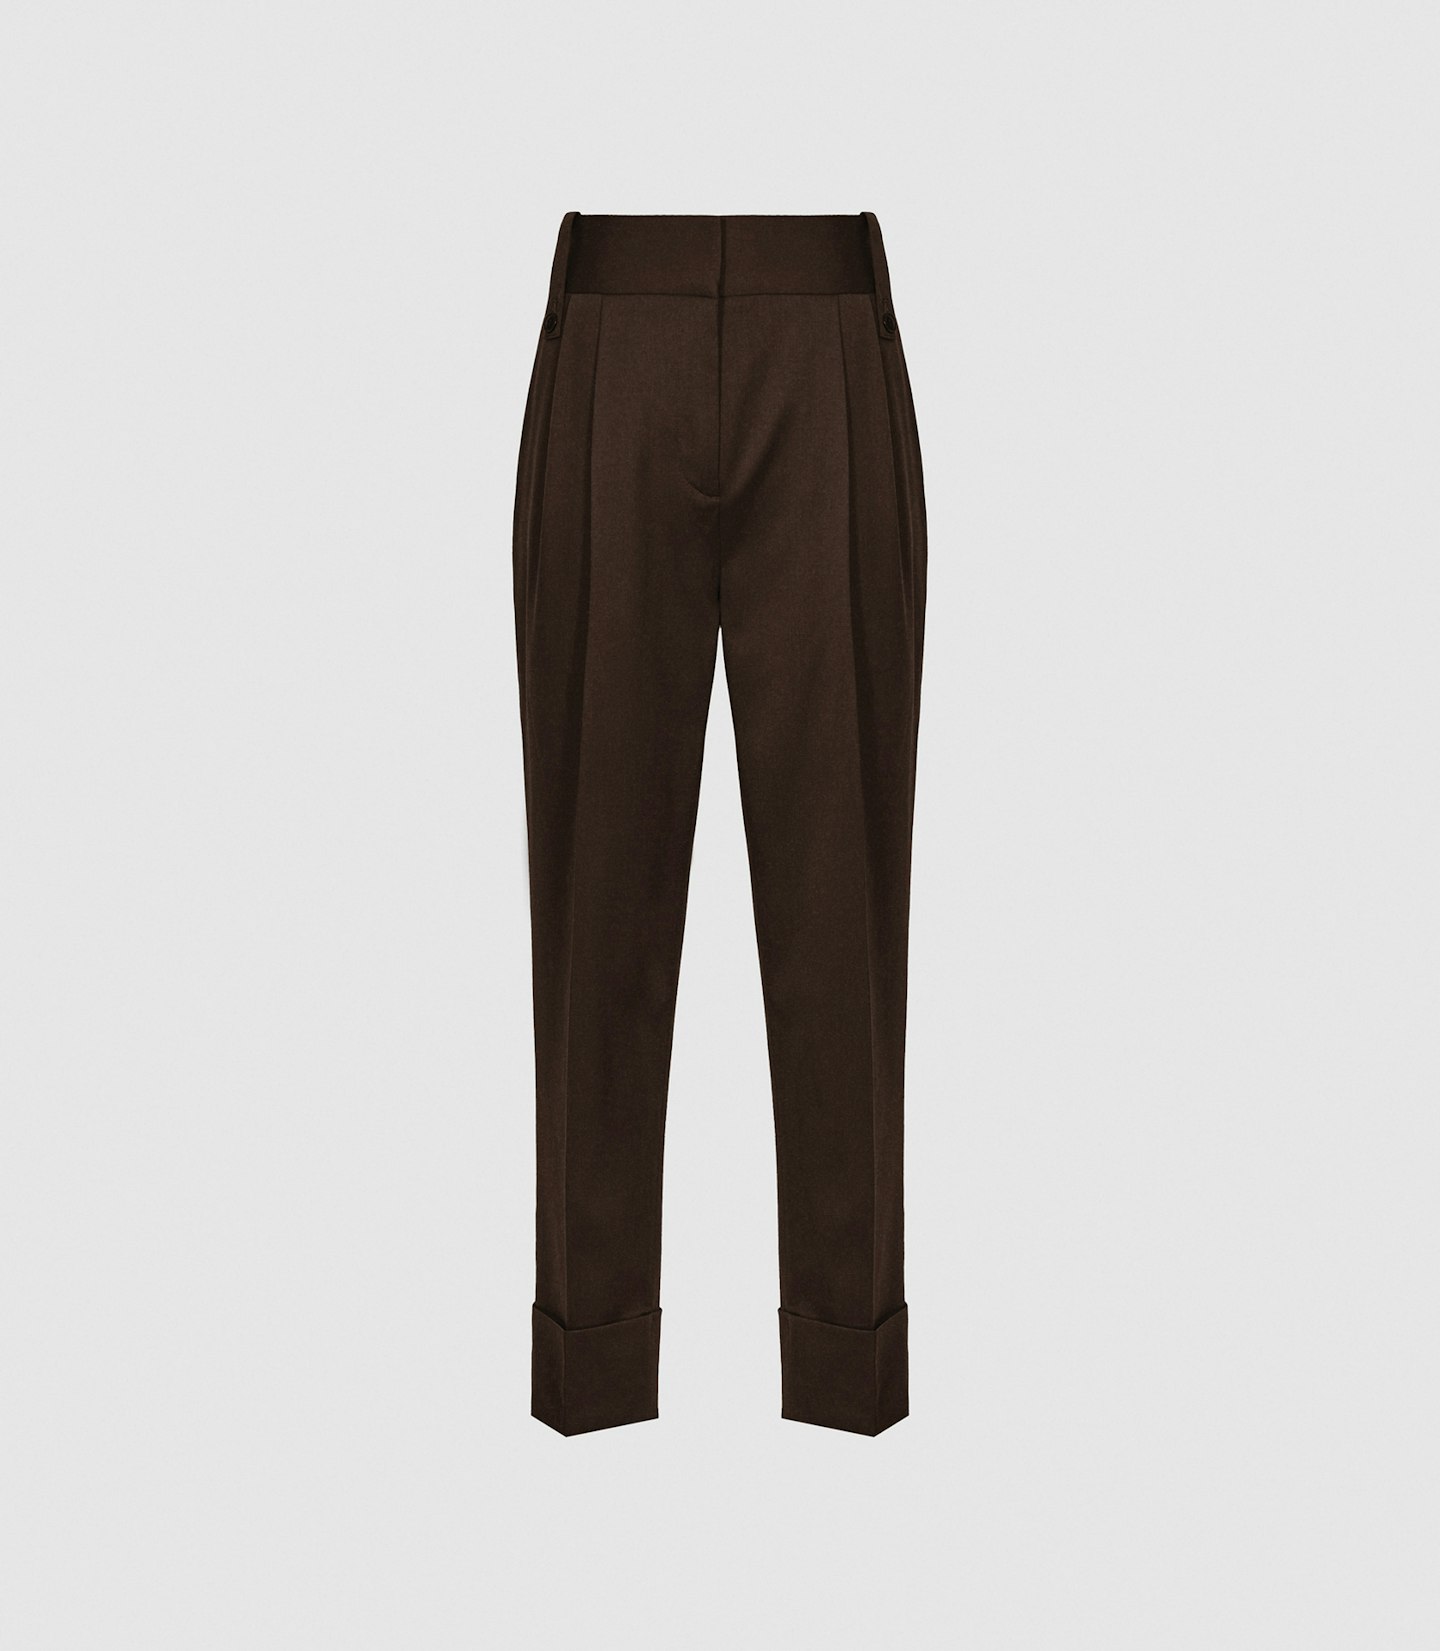 Reiss, Wool-Blend Pleat-Front Trousers Chocolate, £150